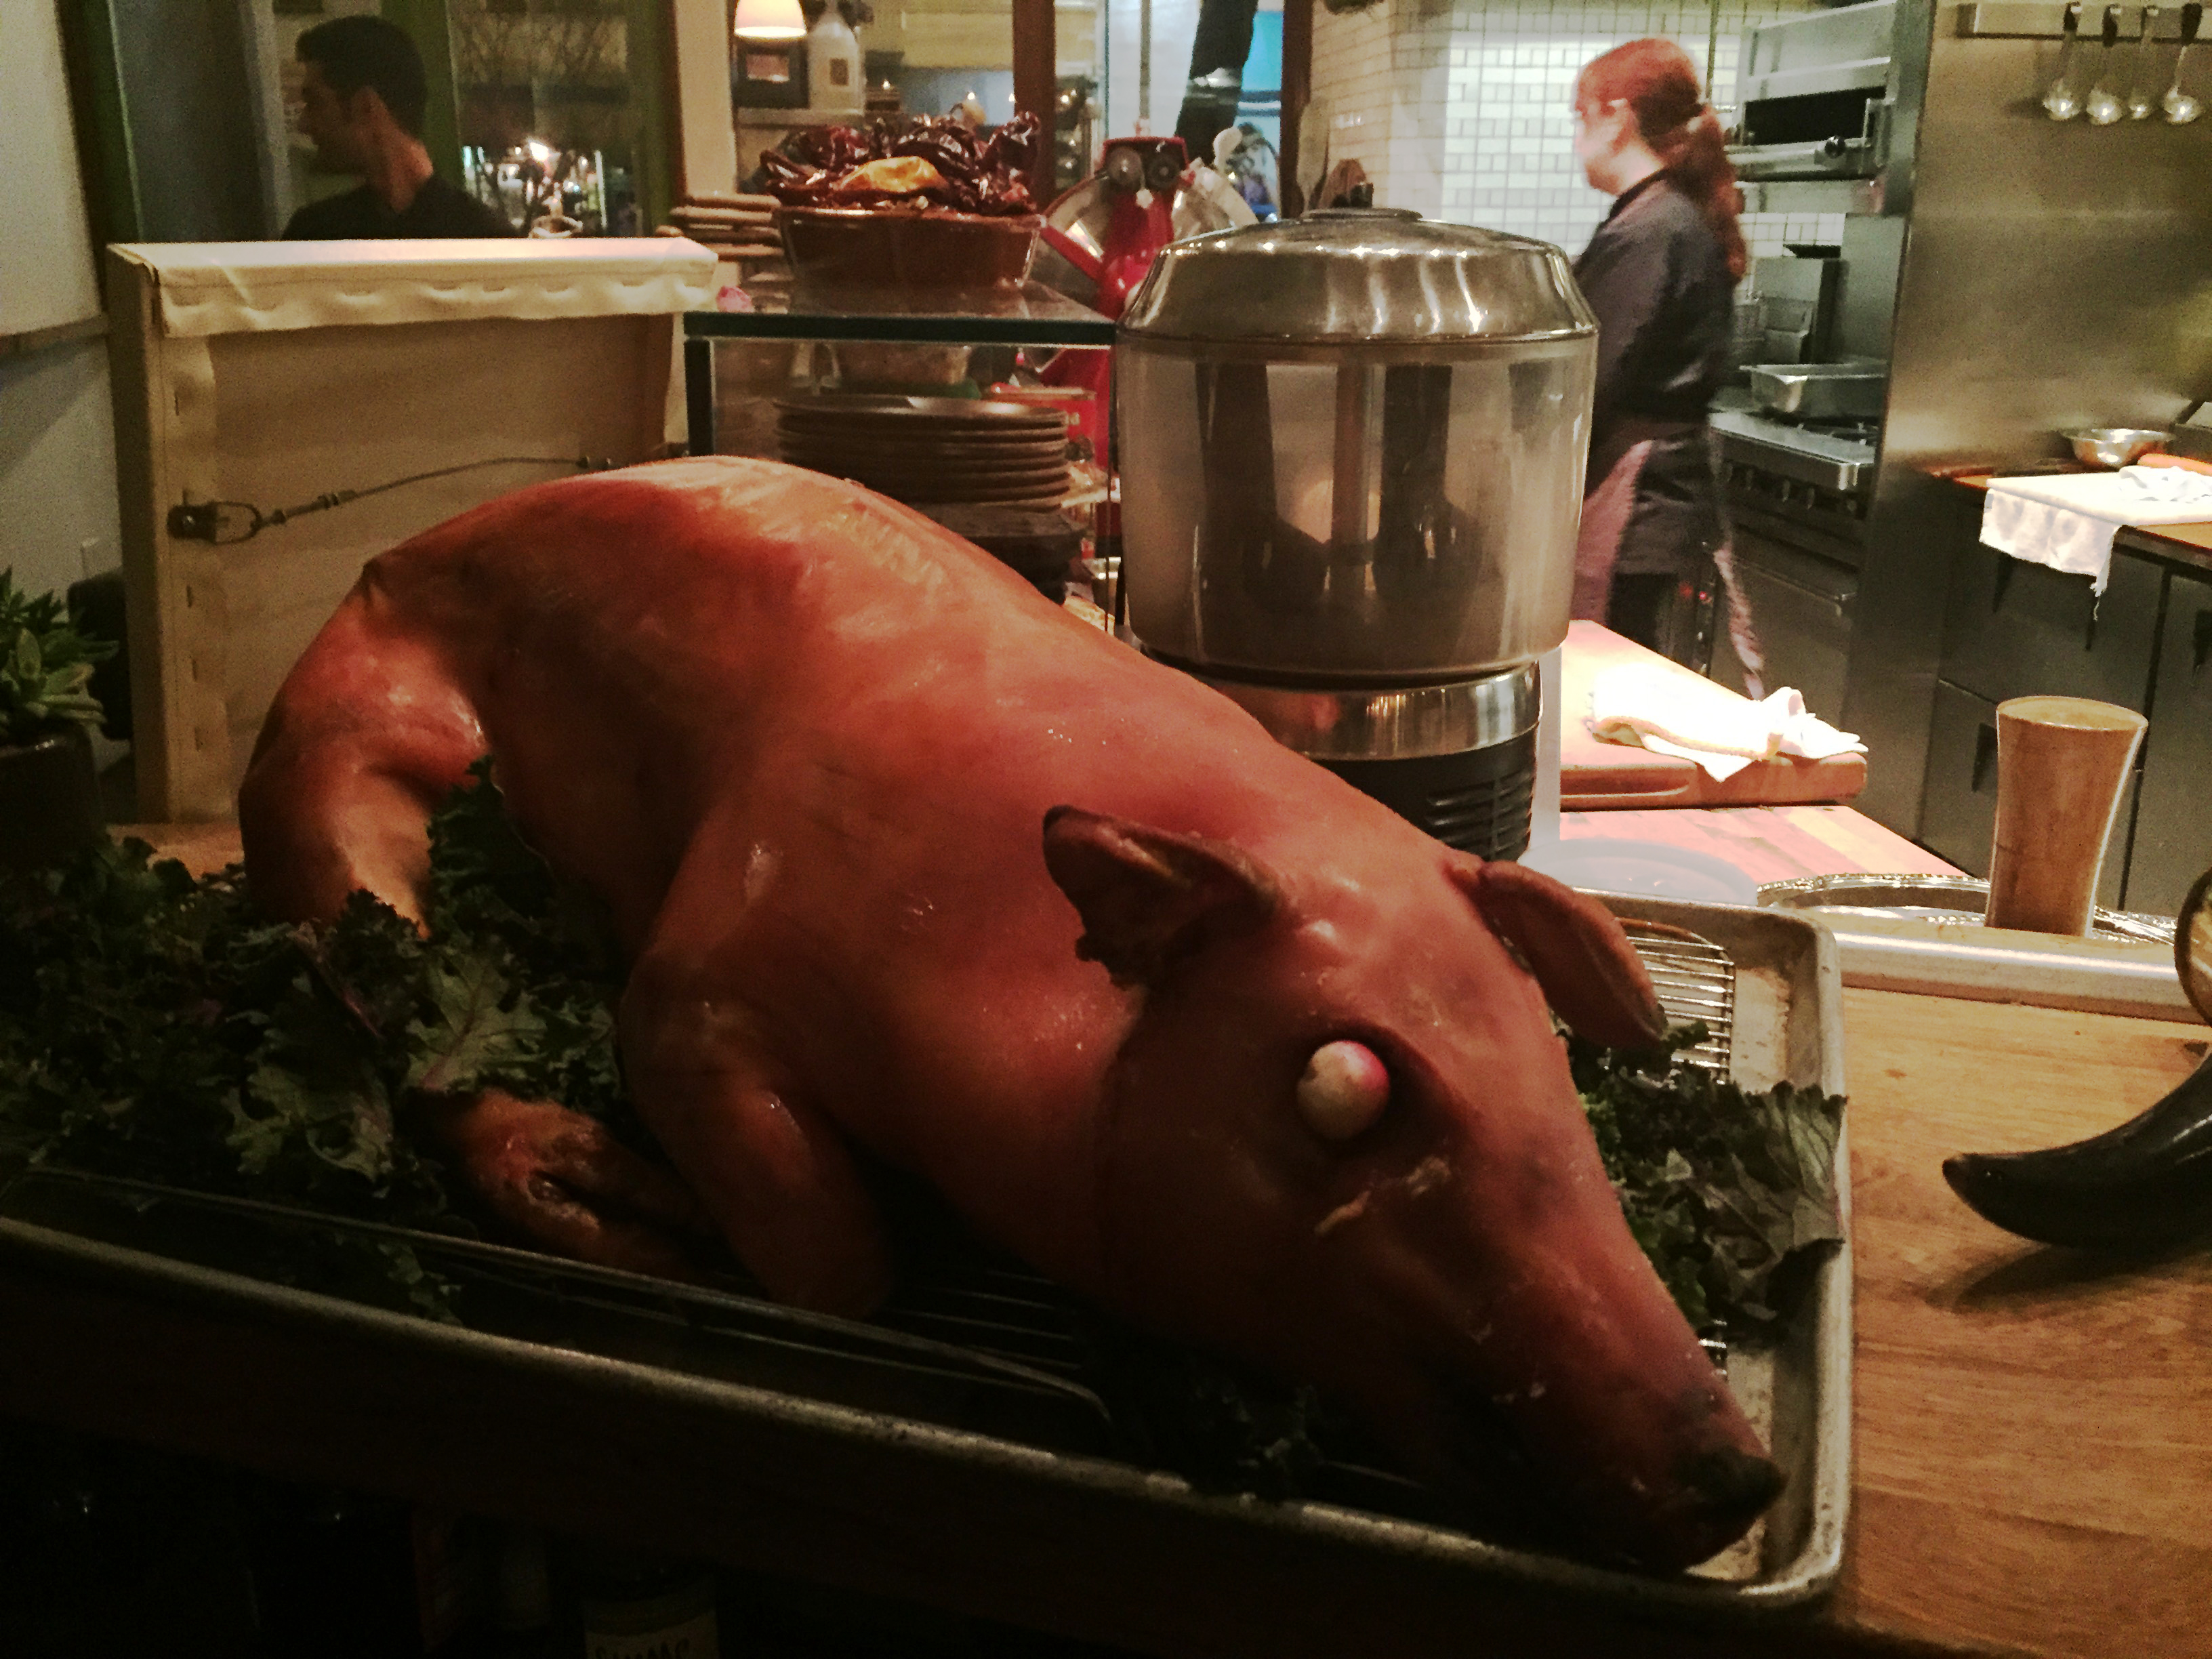 The suckling pig will soon be carved and served with plum sauce.